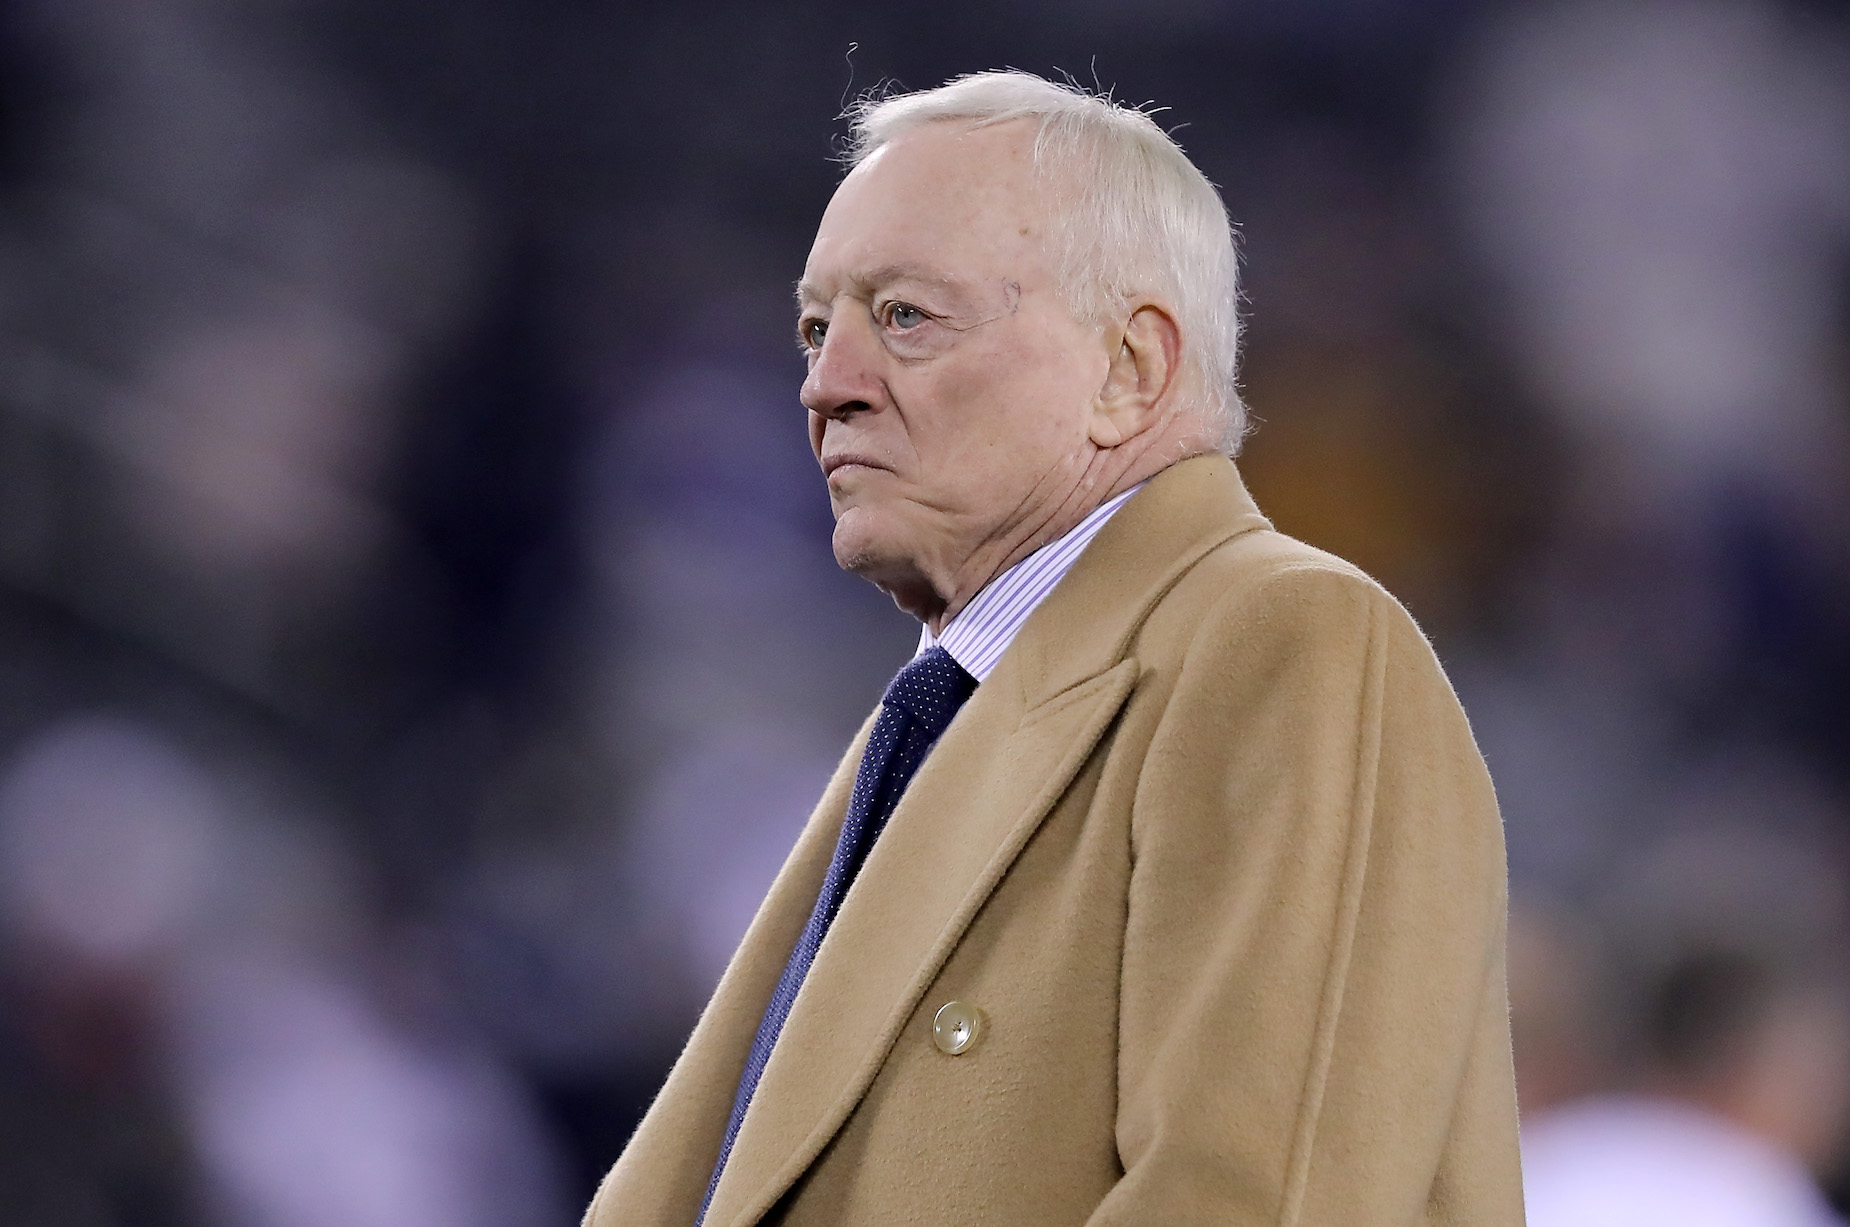 On Election Day, Jerry Jones' name was invoked to inspire Philadelphians to vote against Donald Trump.